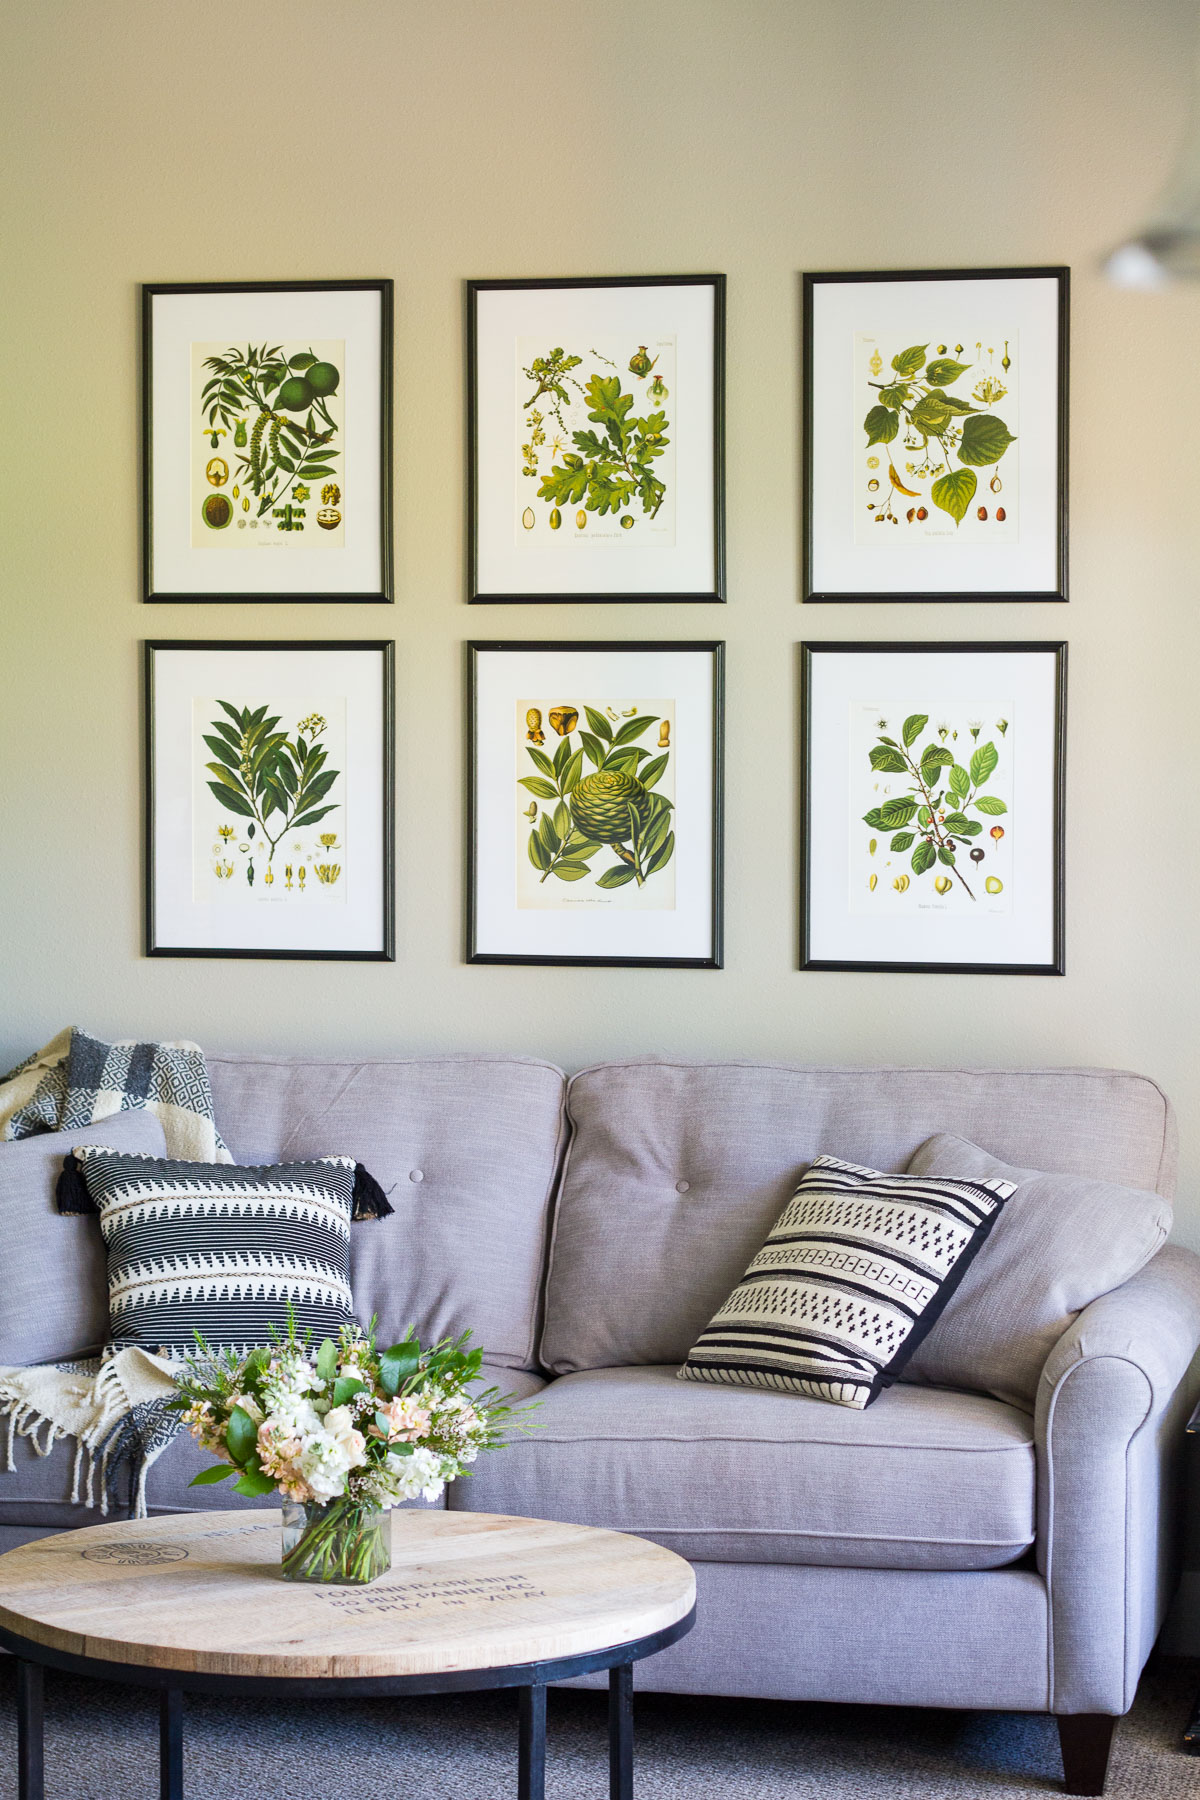 Botanical prints arranged in a grid above a gray couch; black and white accent pillows